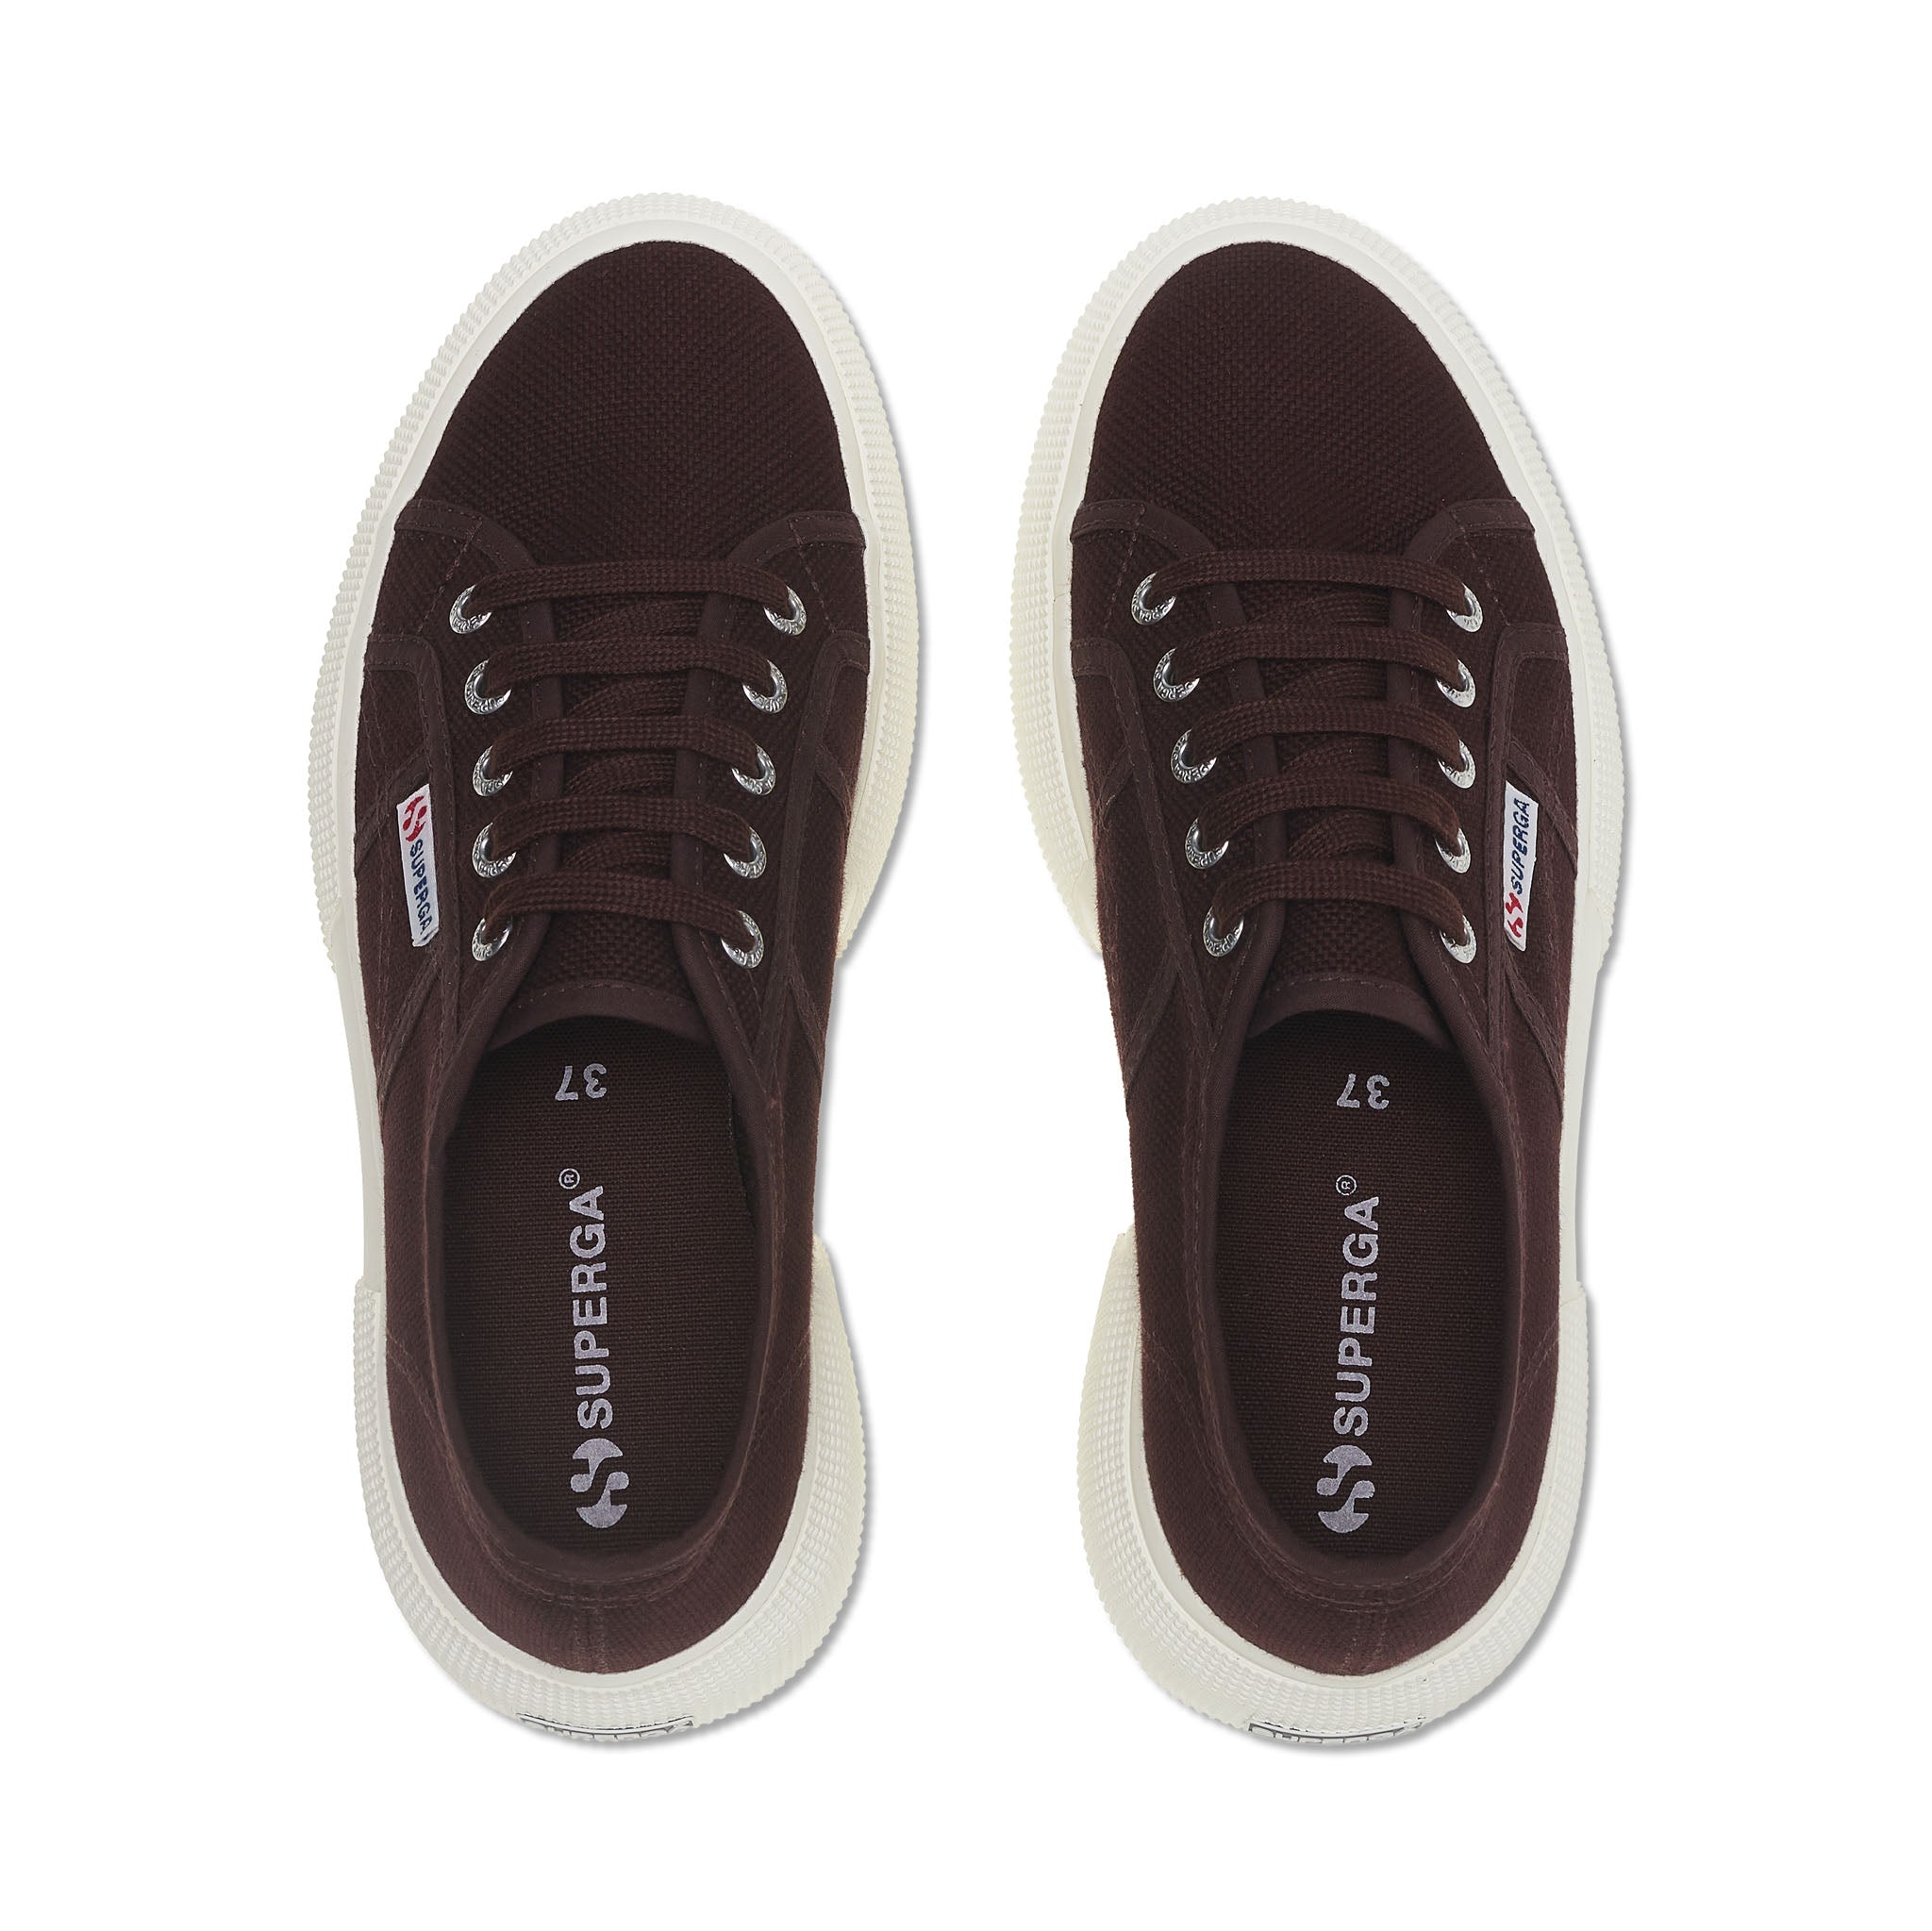 Superga 2287 Bubble Sneakers - Brown. Top view.